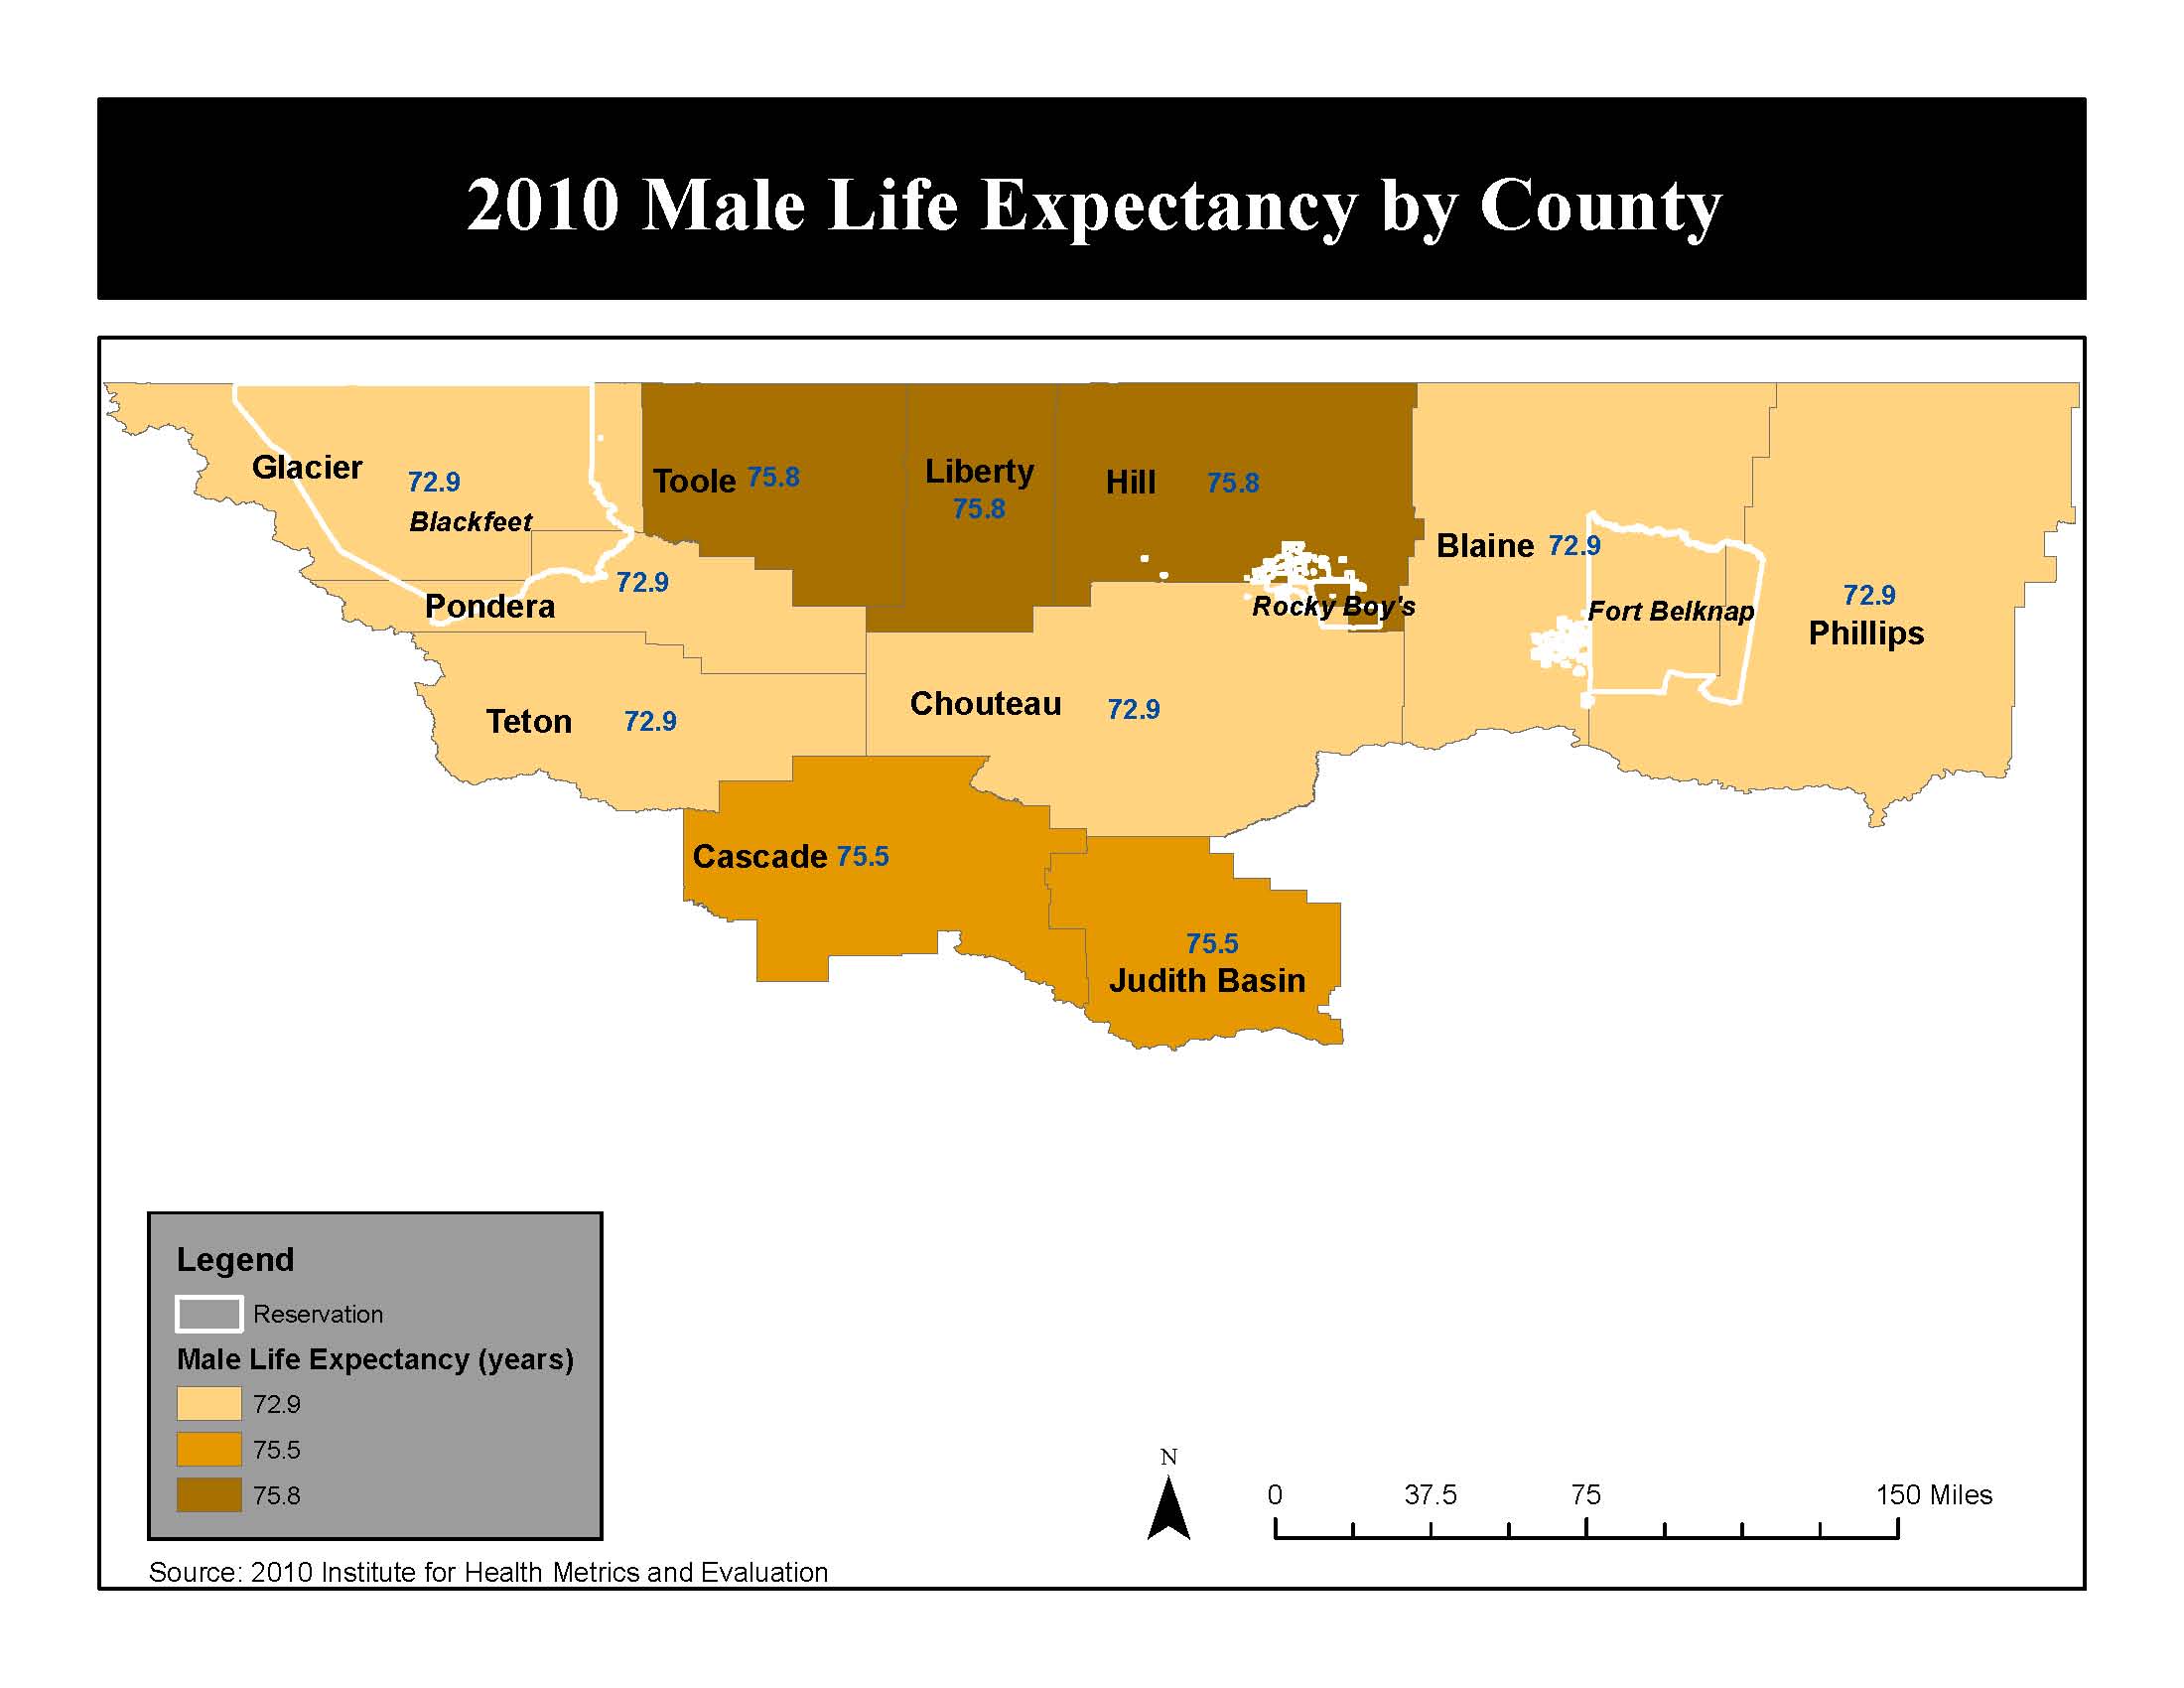 Male Life Expectancy